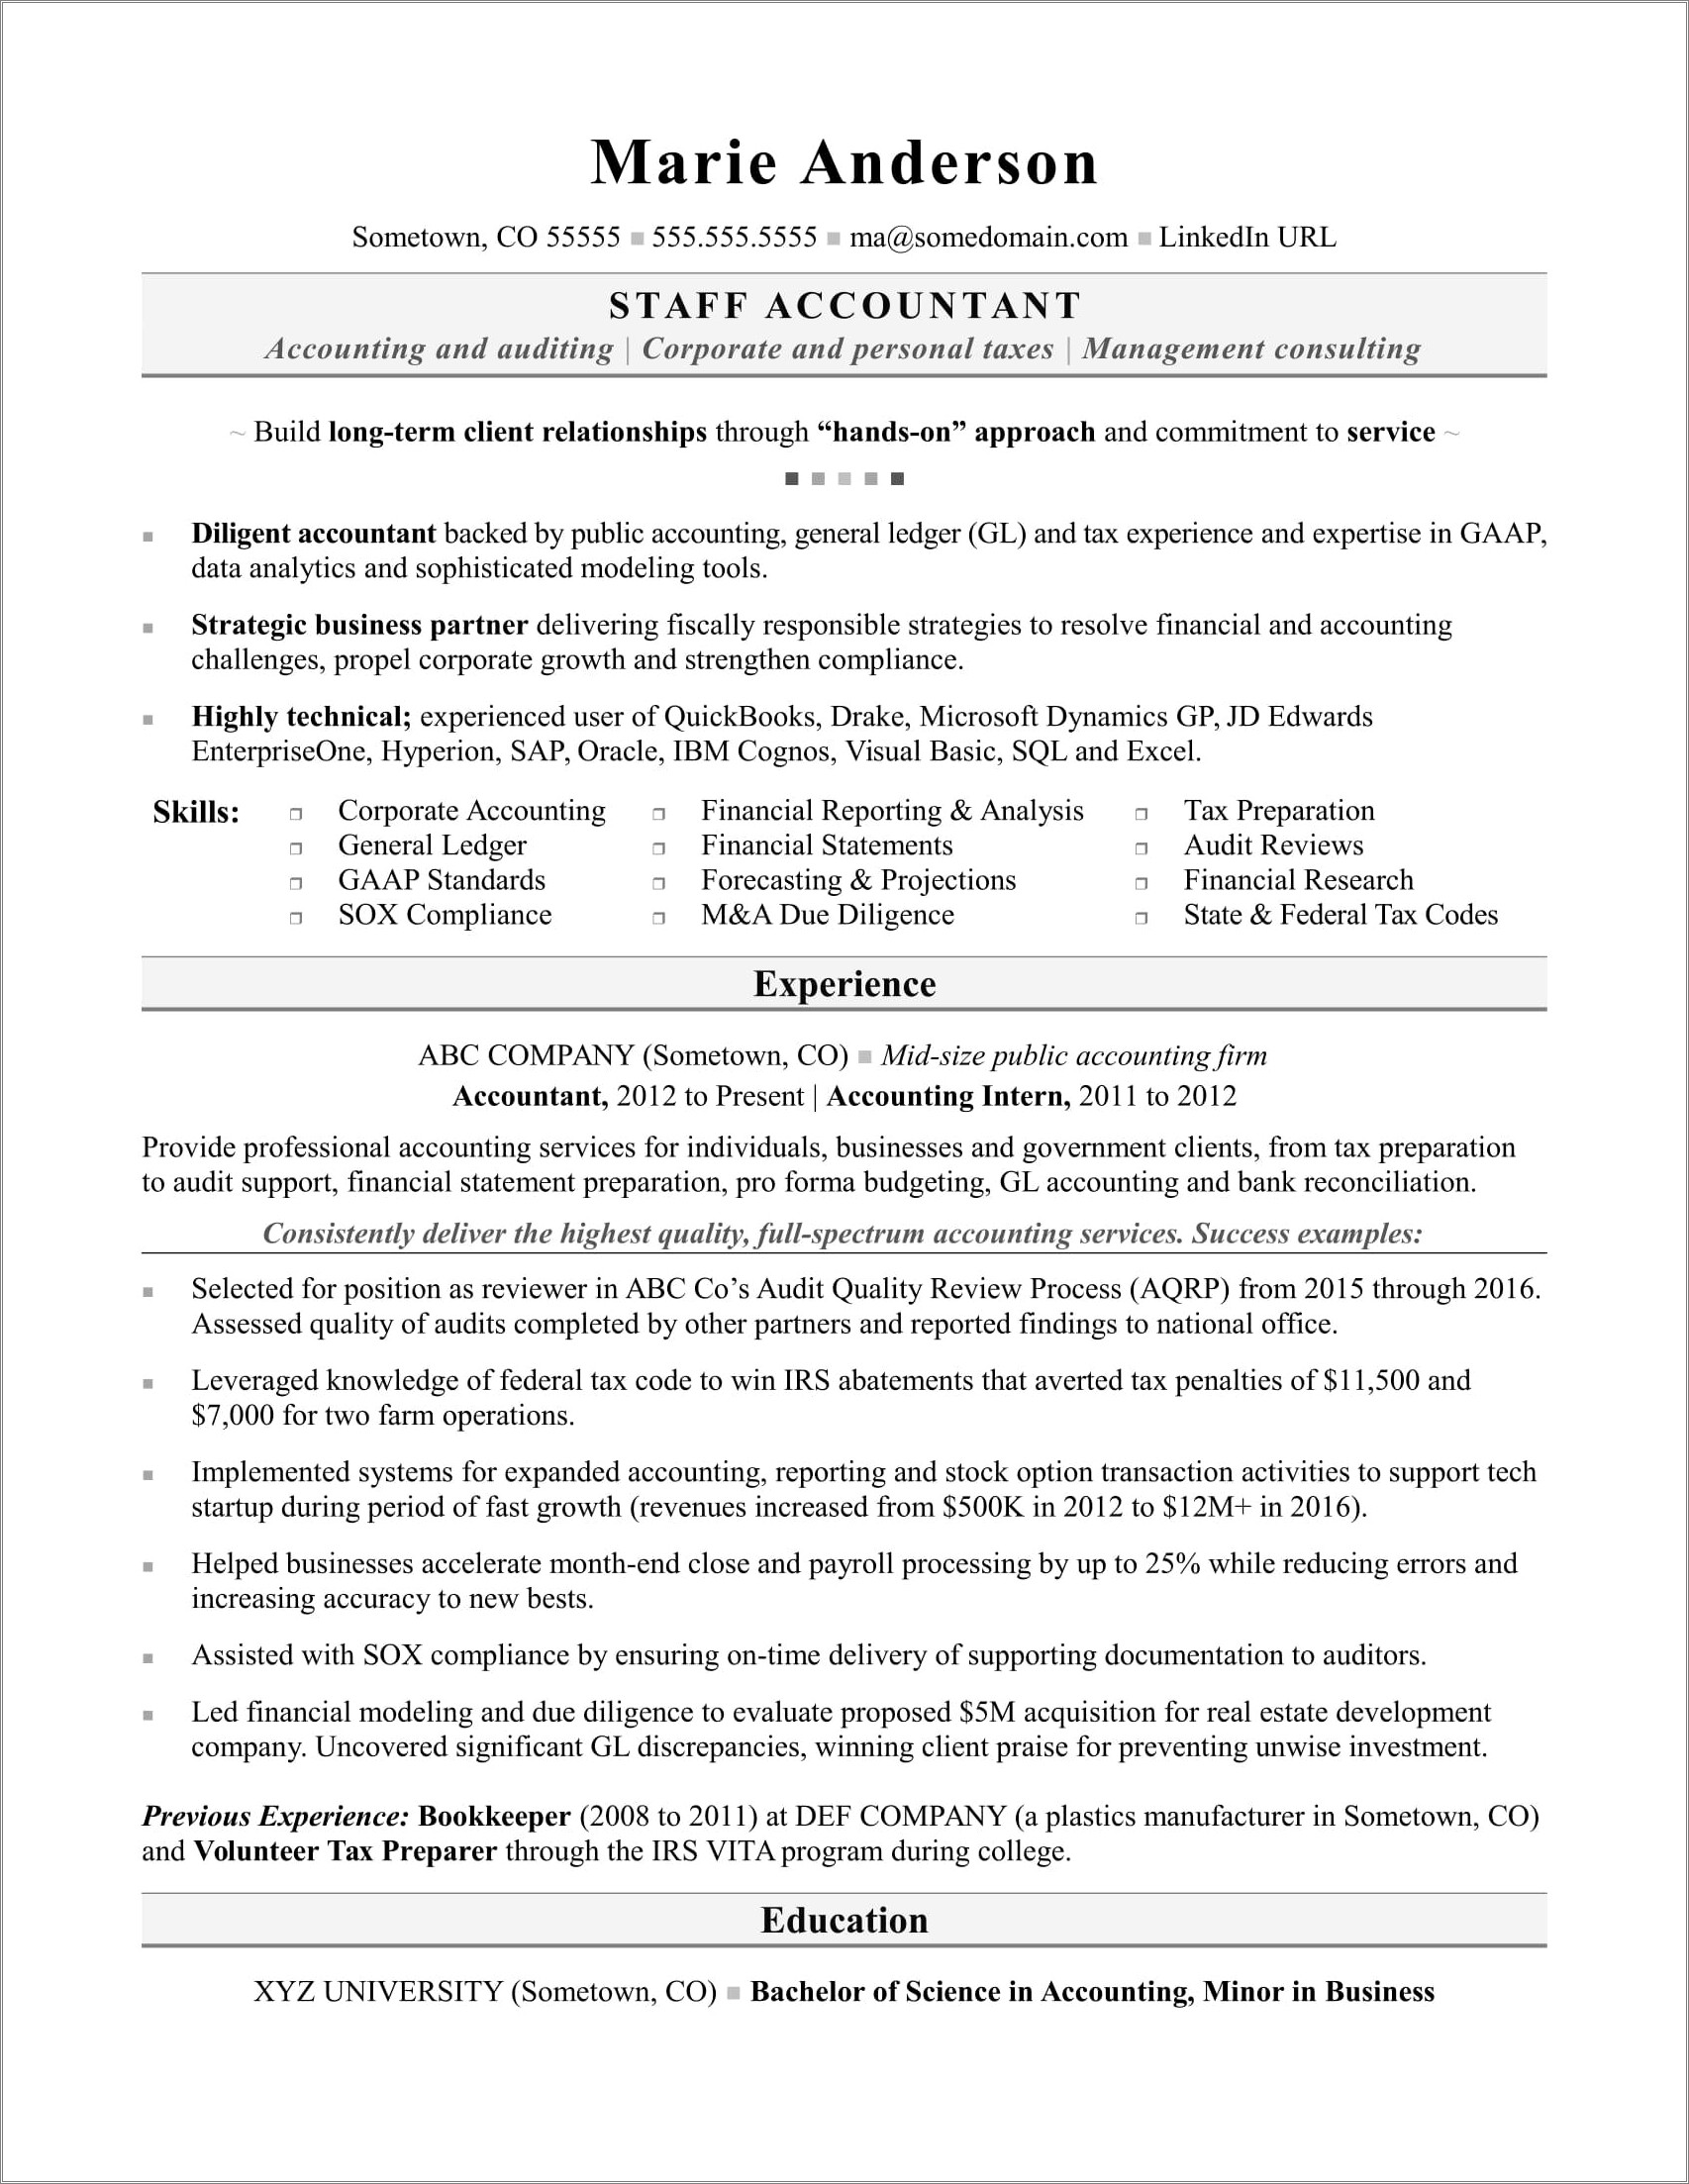 Resume Samples Showing Part Time Account Receivables Experience